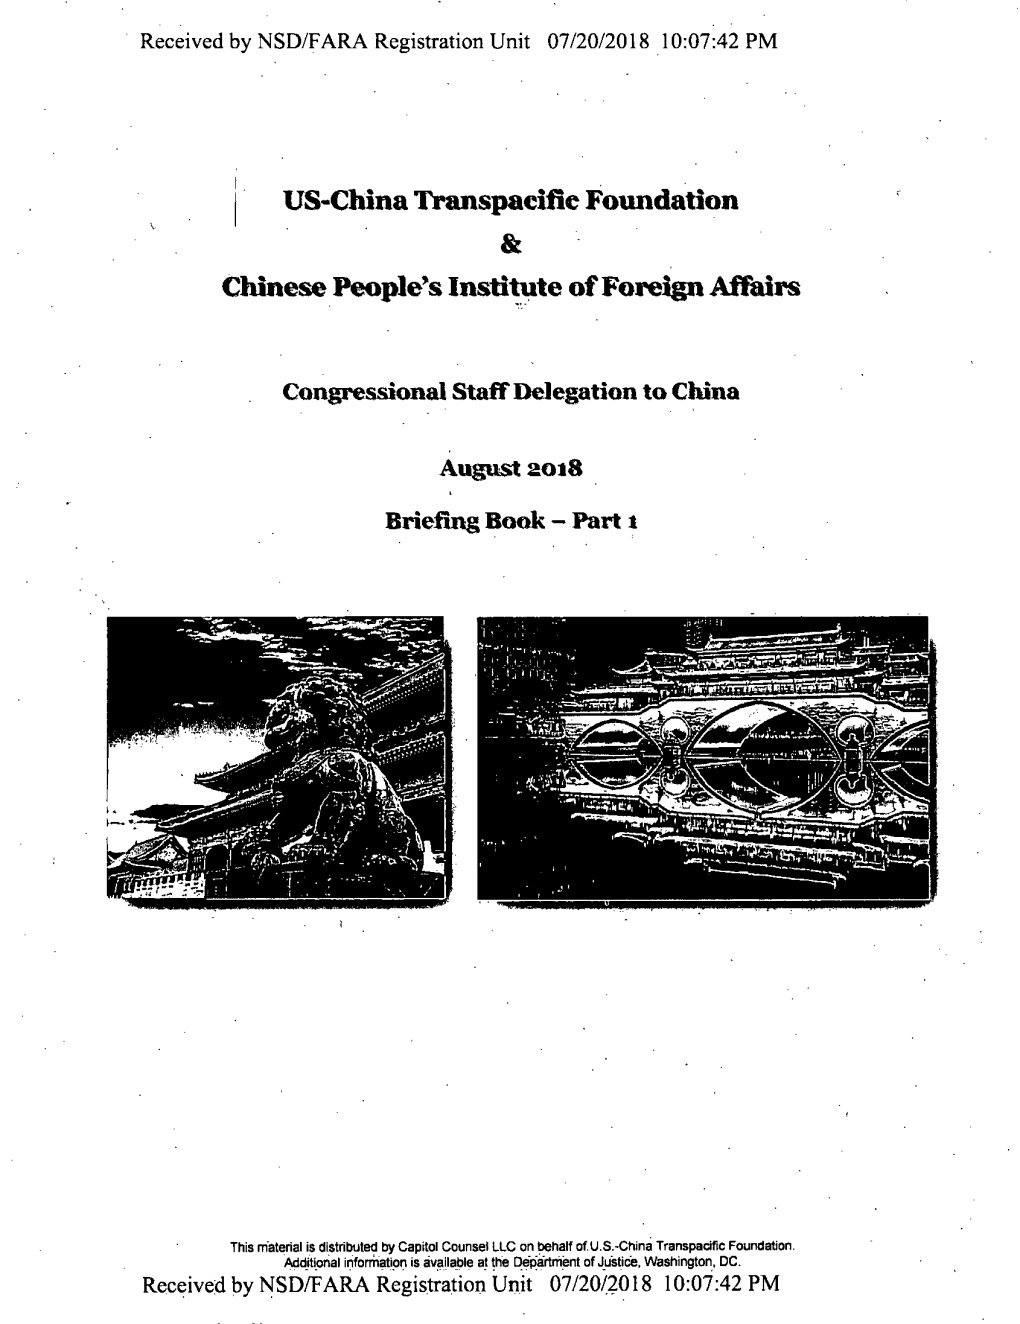 I US-China Transpacific Foundation & Chinese People's Lnsti~Te of Foreign Affairs